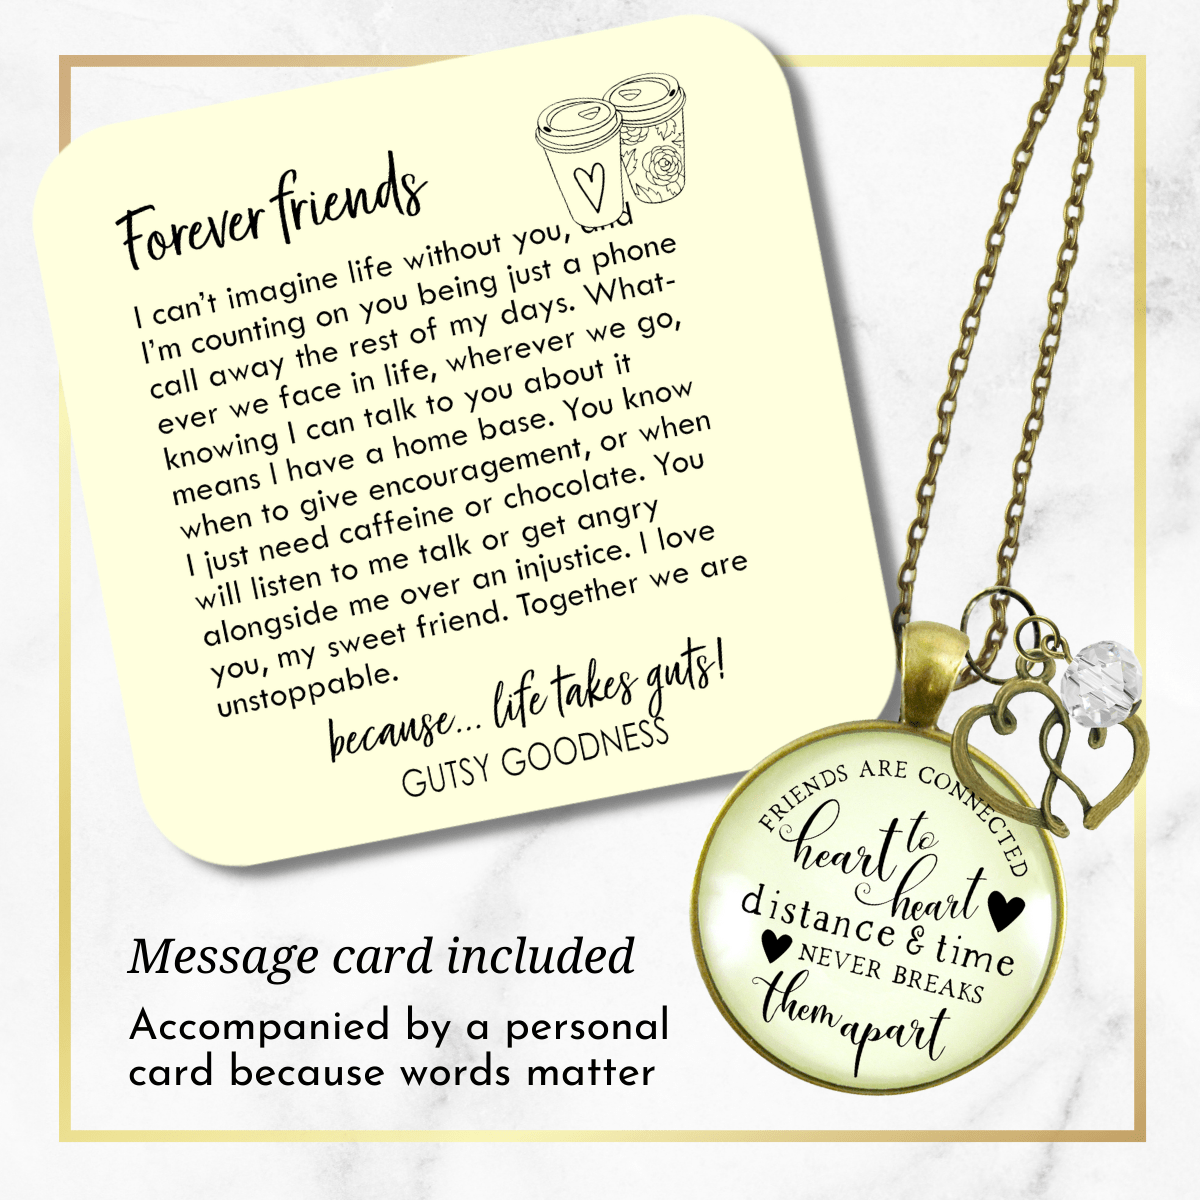 Gutsy Goodness Friendship Necklace Friends Connected Long Distance Jewelry Open Charm - Gutsy Goodness;Friendship Necklace Friends Connected Long Distance Jewelry Open Charm - Gutsy Goodness Handmade Jewelry Gifts